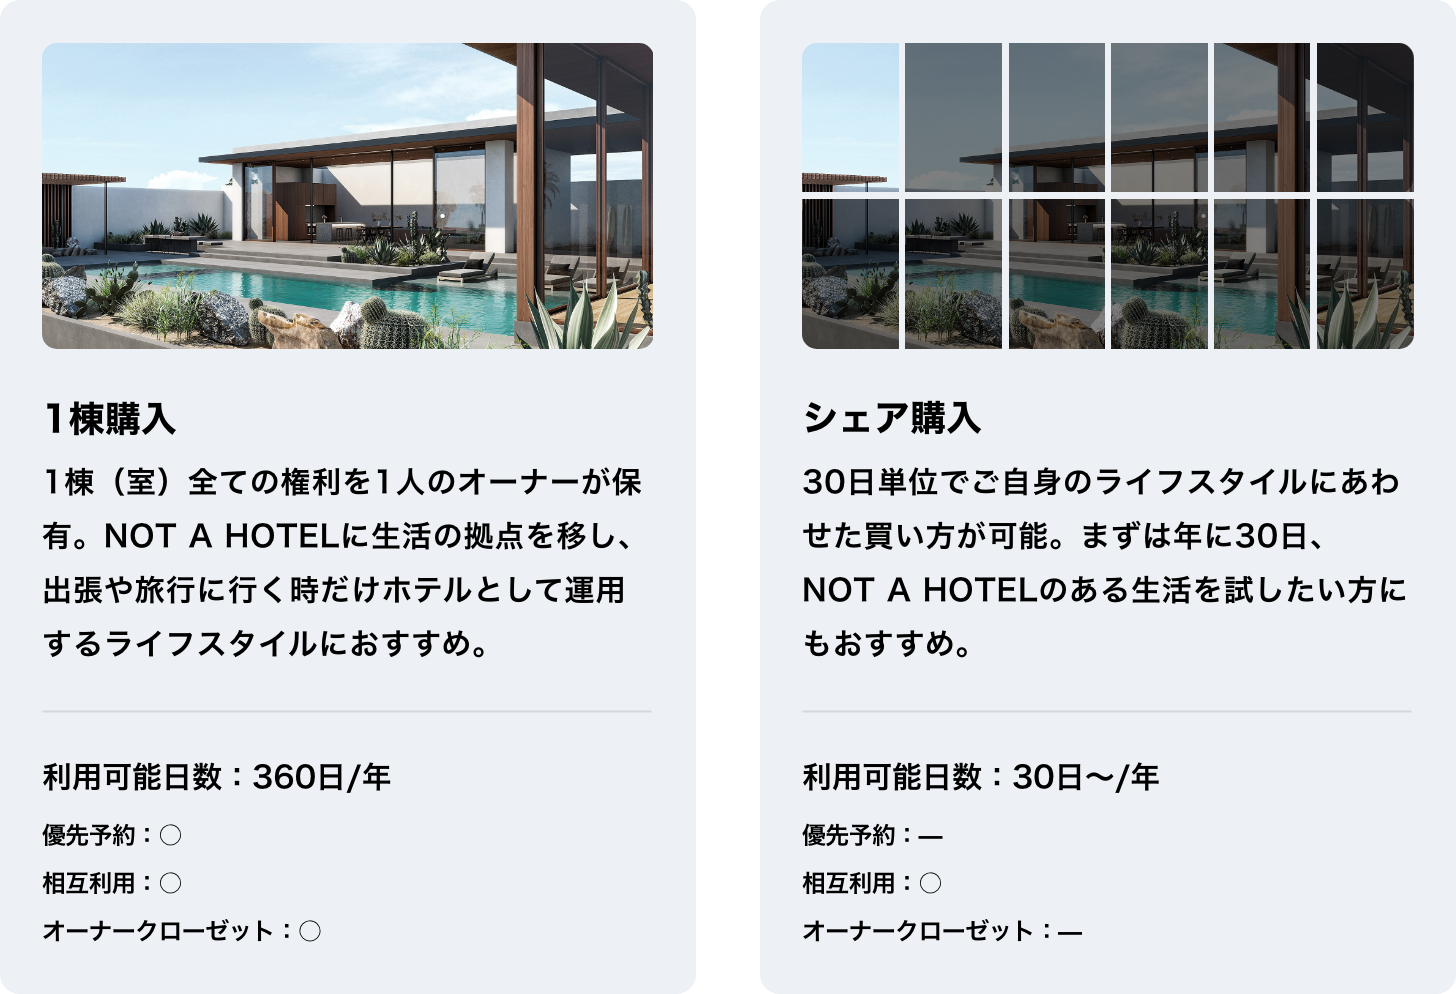 Vol.4 NOT A HOTEL の買い方について先行公開 - NOT A HOTEL Newsletter